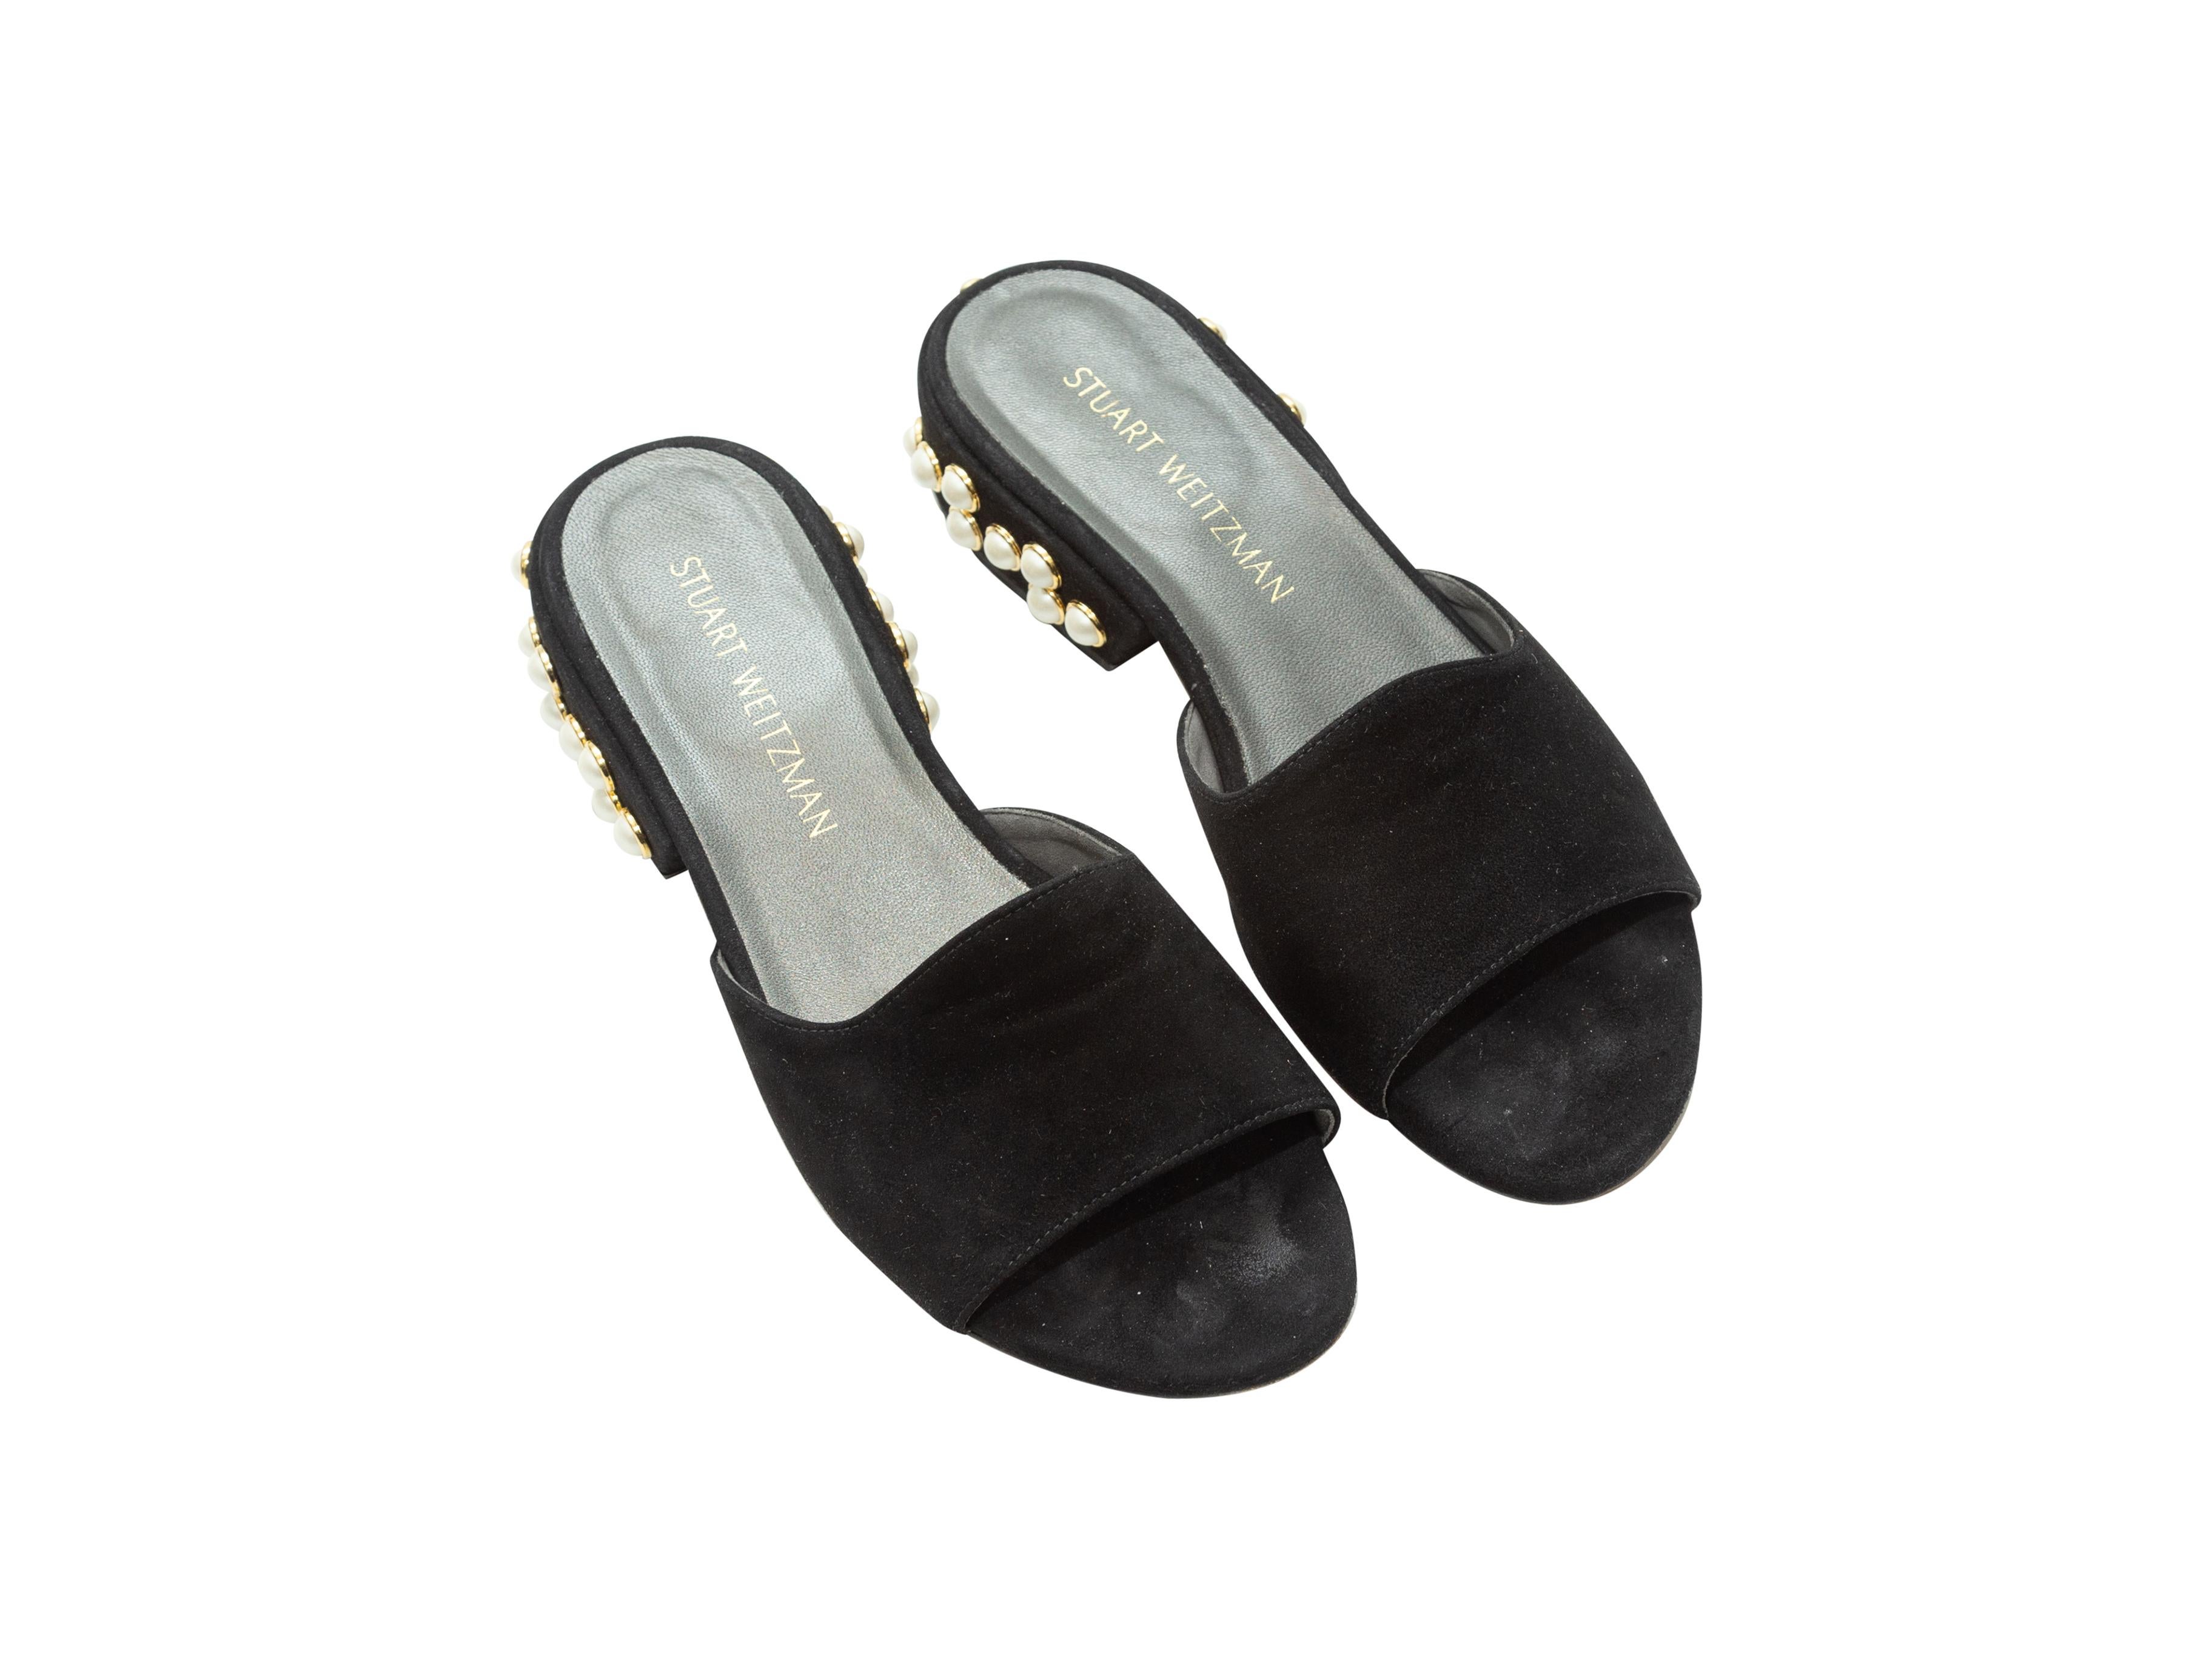 Product details: Black suede slide sandals by Stuart Weitzman. Faux pearl embellishments at block heels.
Condition: Pre-owned. Very good. Minor wear at inner soles.
Est. Retail $ 495.00